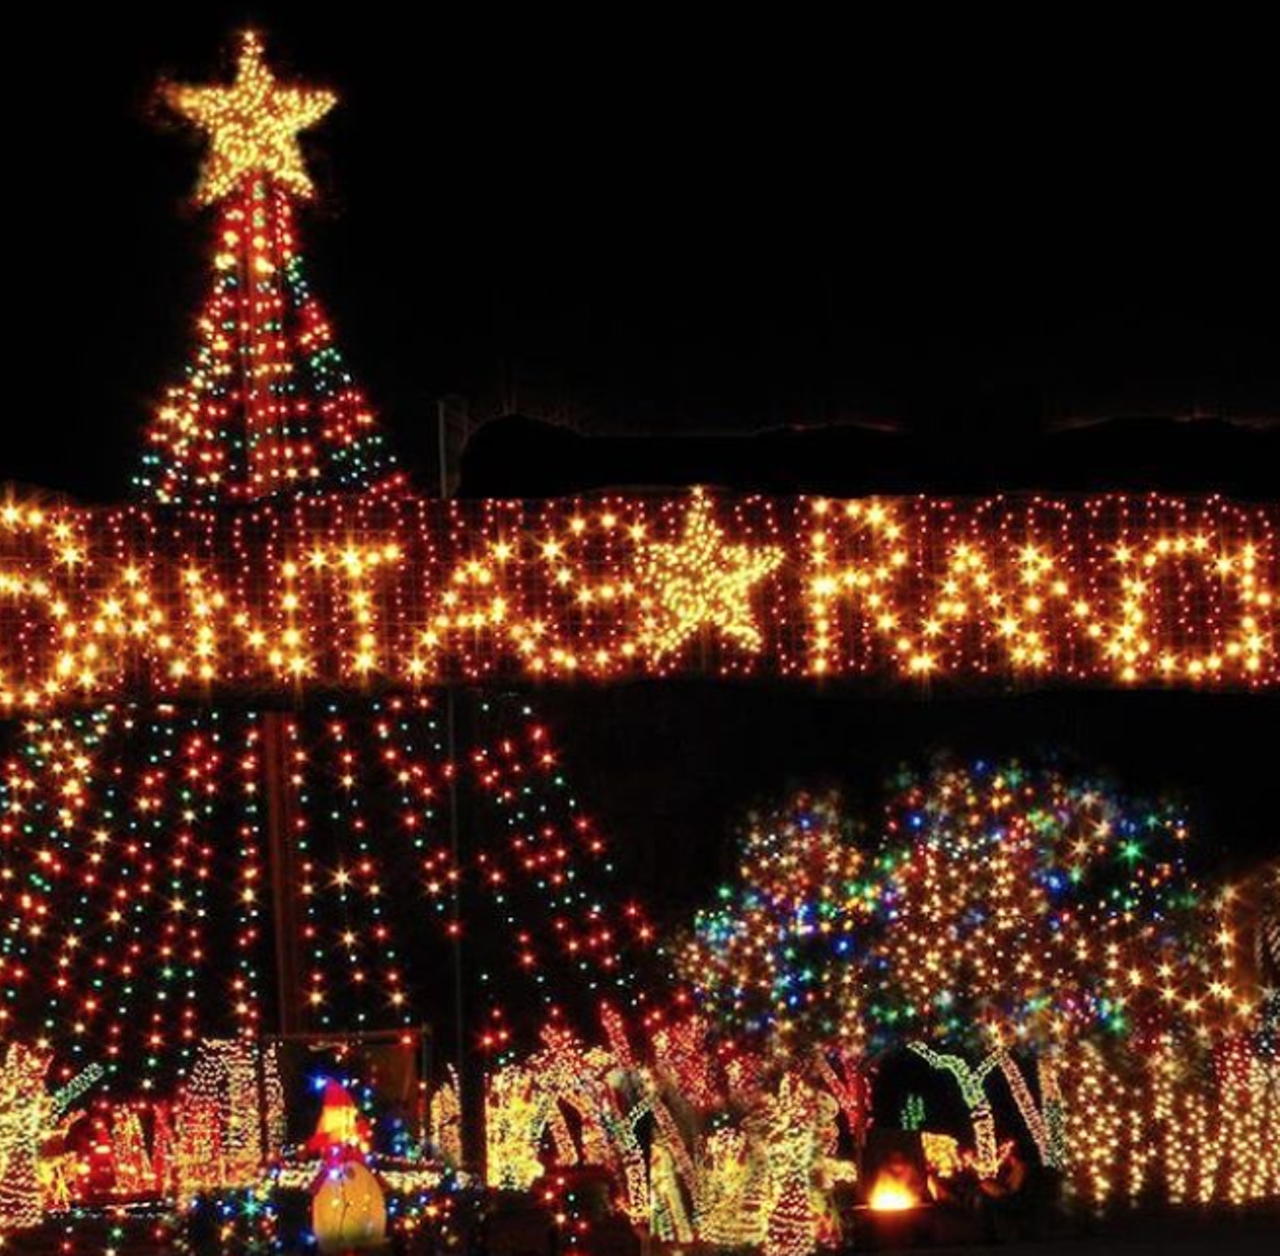 Santa’s Ranch in New Braunfels
$28 + tax per vehicle, 9561 IH 35 North, New Braunfels, (830) 743-1293, santasranch.net
If you and your family don’t take a mini road trip up to New Braunfels for Santa’s Ranch every yea,r well then you’re doing Christmas all wrong. Considered one of the biggest and best drive-thru Christmas light offerings in the area, the ranch presents an assortment of displays in all shapes, sizes, colors and interests. The kids will love it, your parents will love it, you’ll love it. Heck, even The Grinch himself would go soft paying Santa’s Ranch a visit.
Photo via mannella02 / Instagram